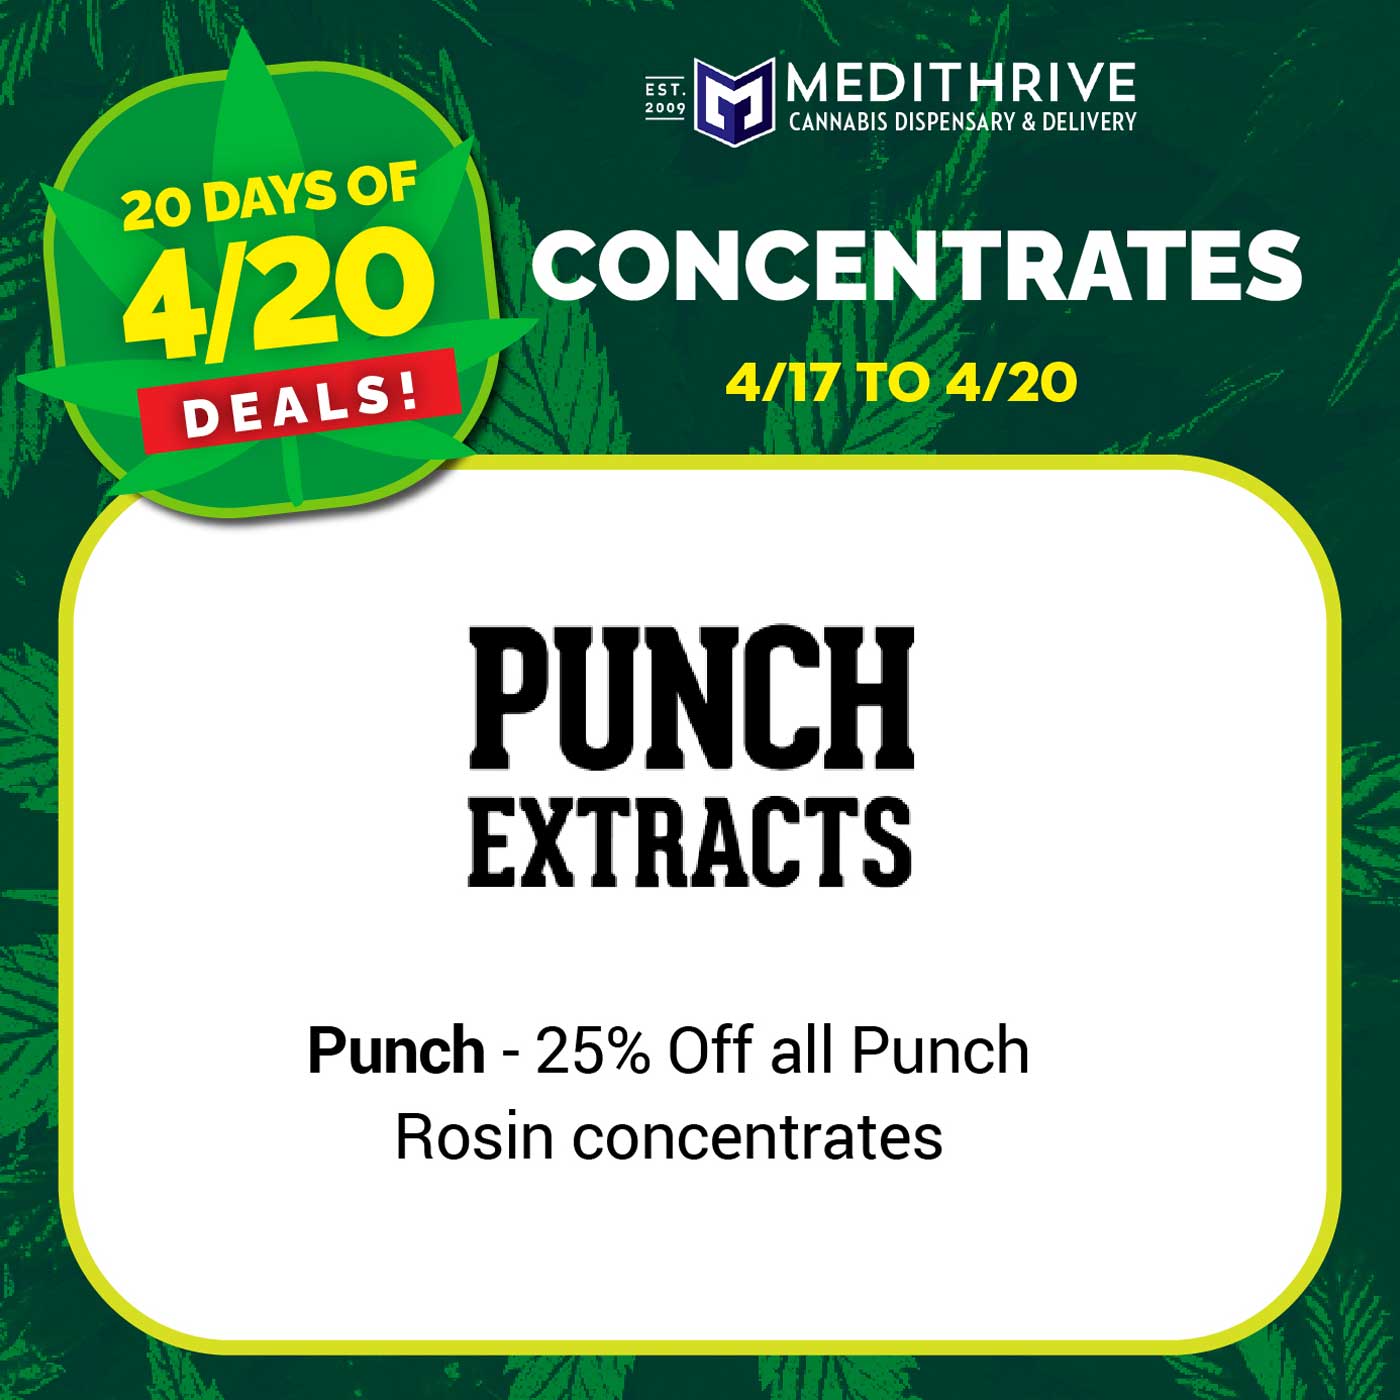 CONCENTRATES - 4/17 to 4/20